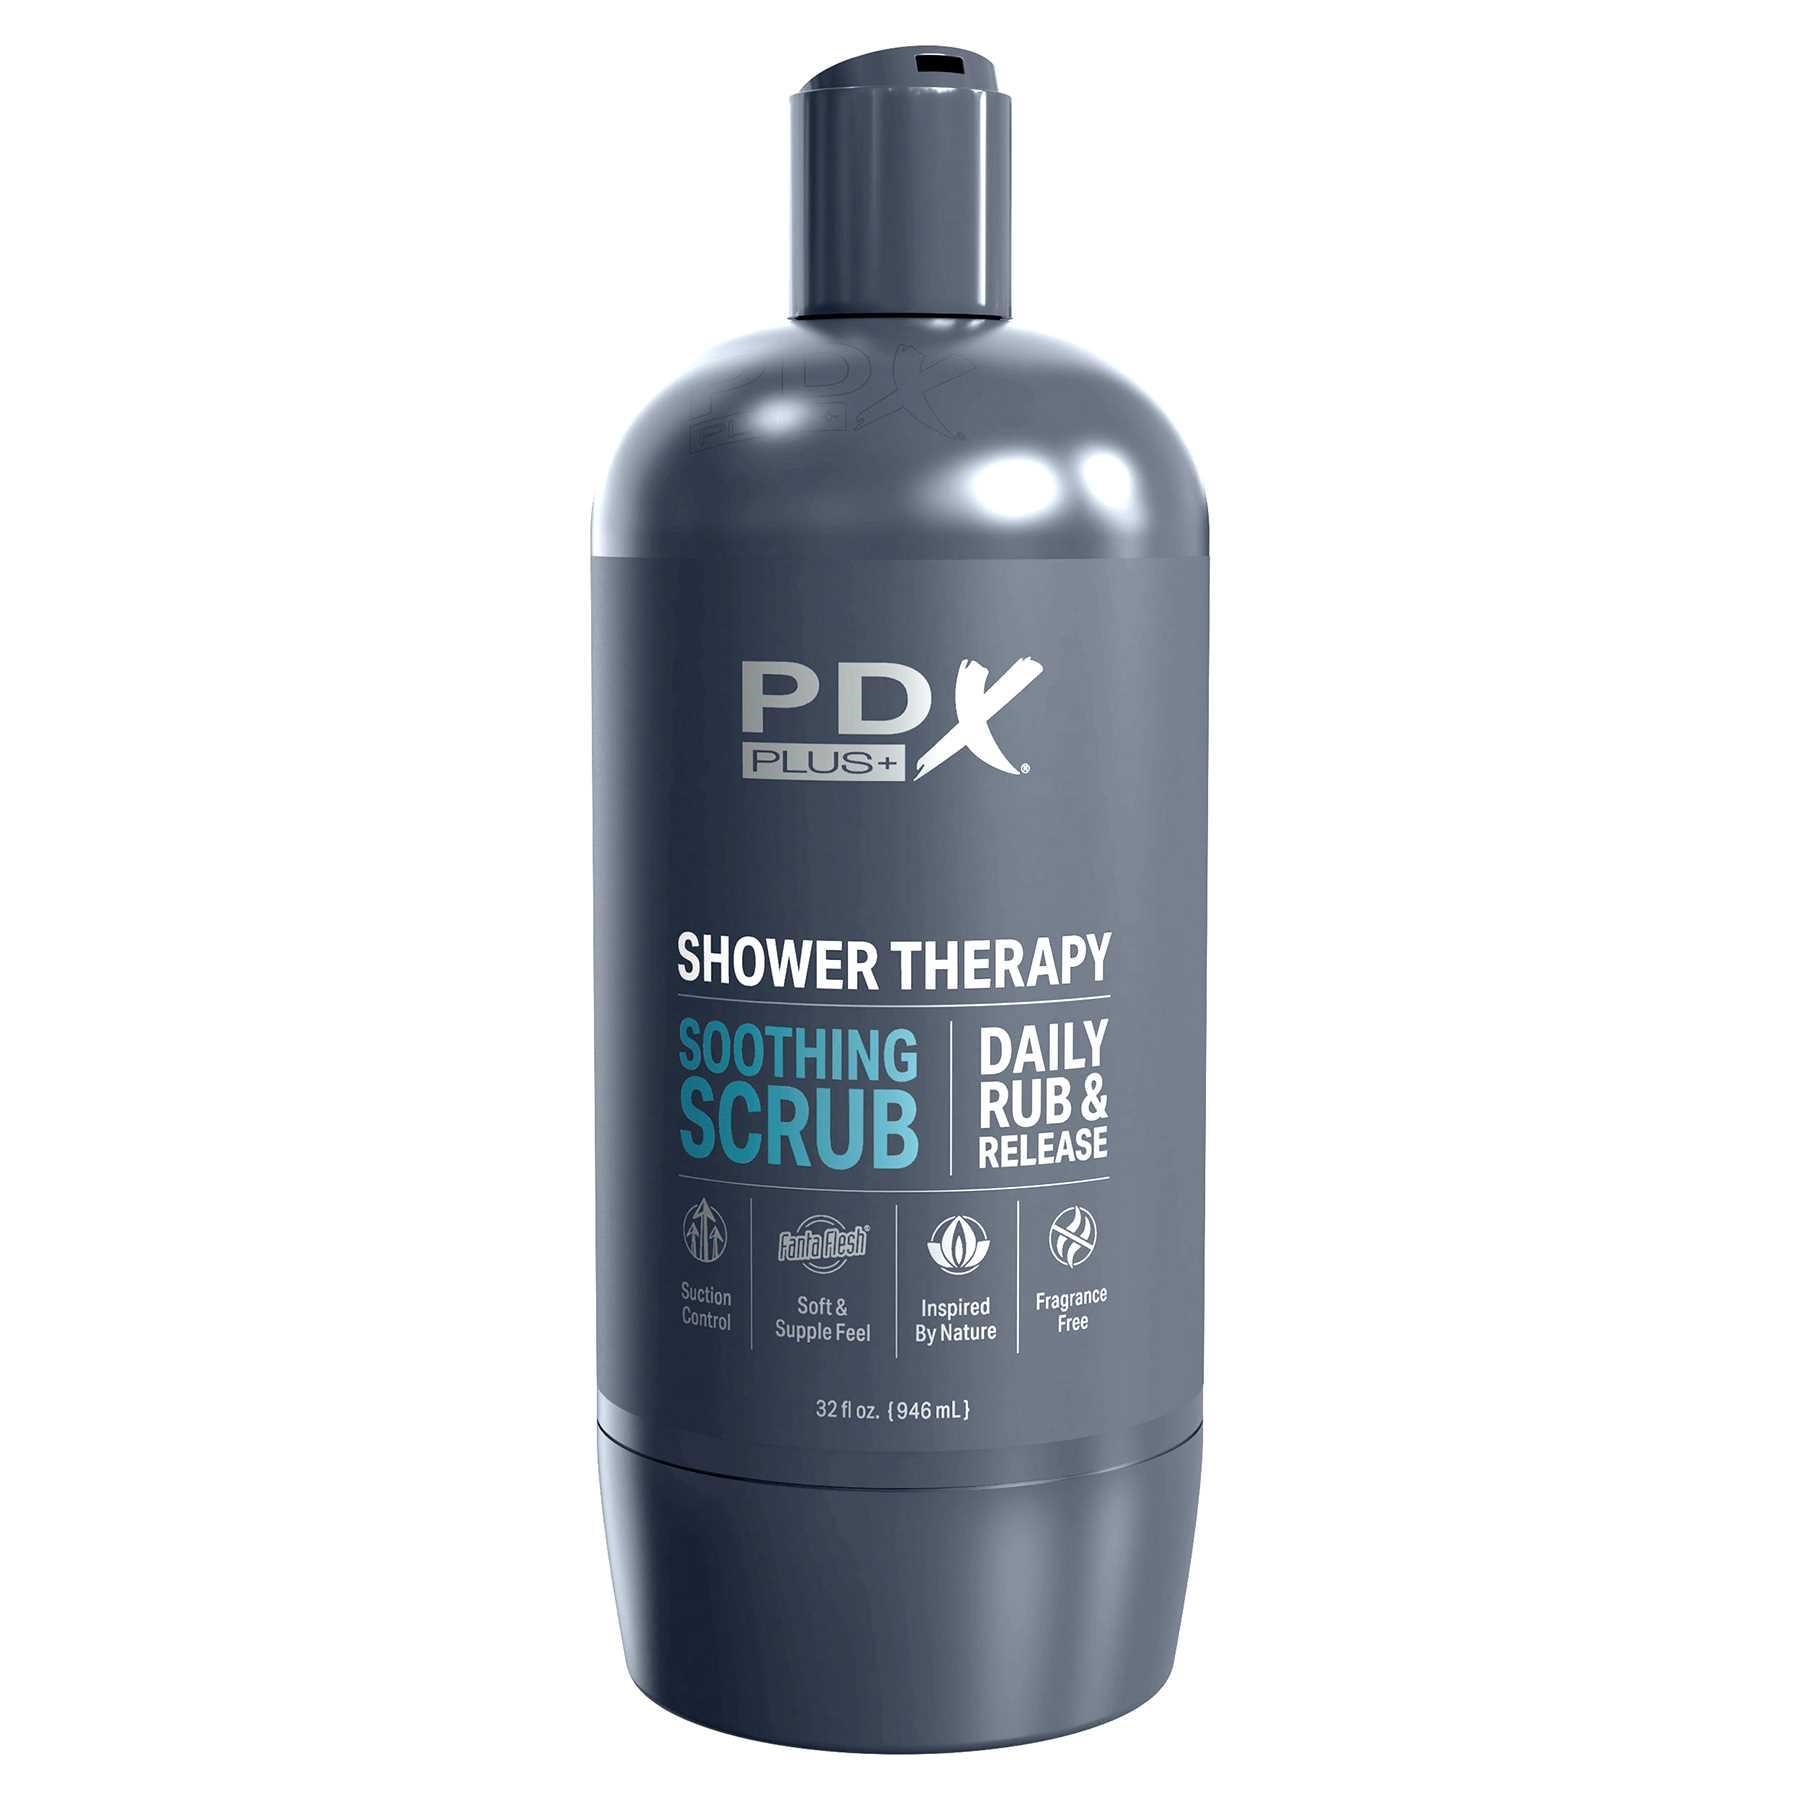 PDX Plus Shower Therapy Soothing Scrub Discreet Stroker male masturbator